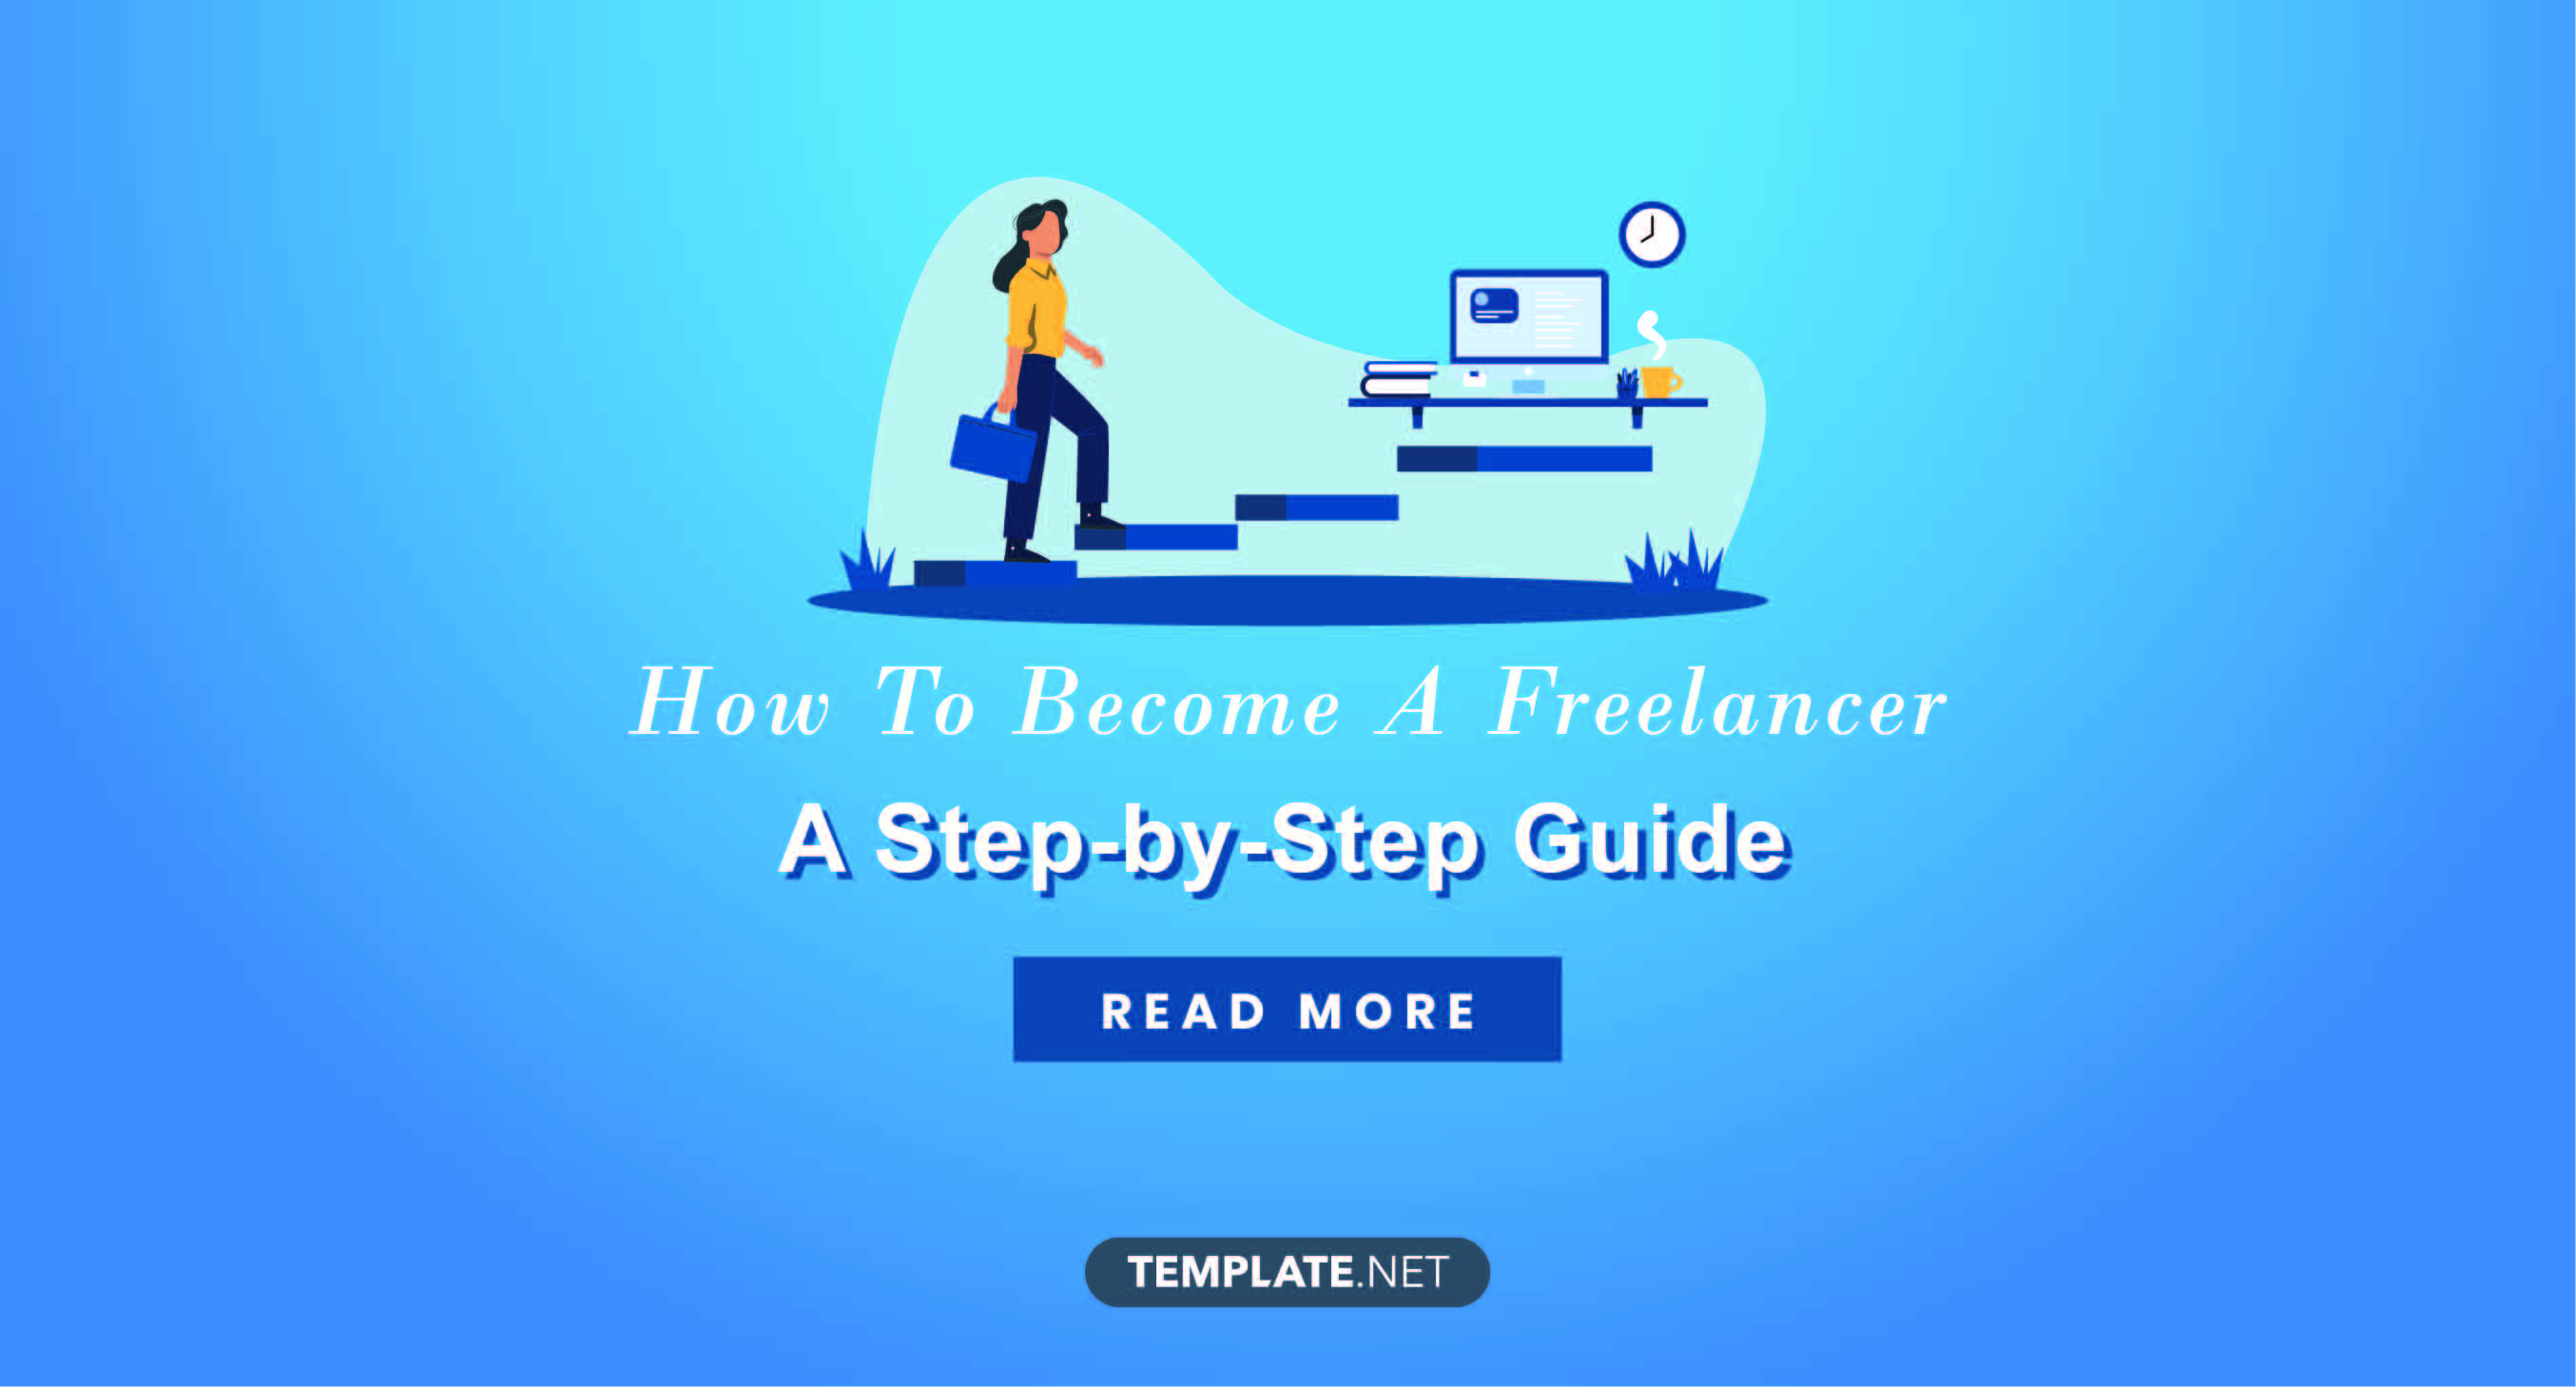 How to Get More Work as a Freelancer - 9 Tips